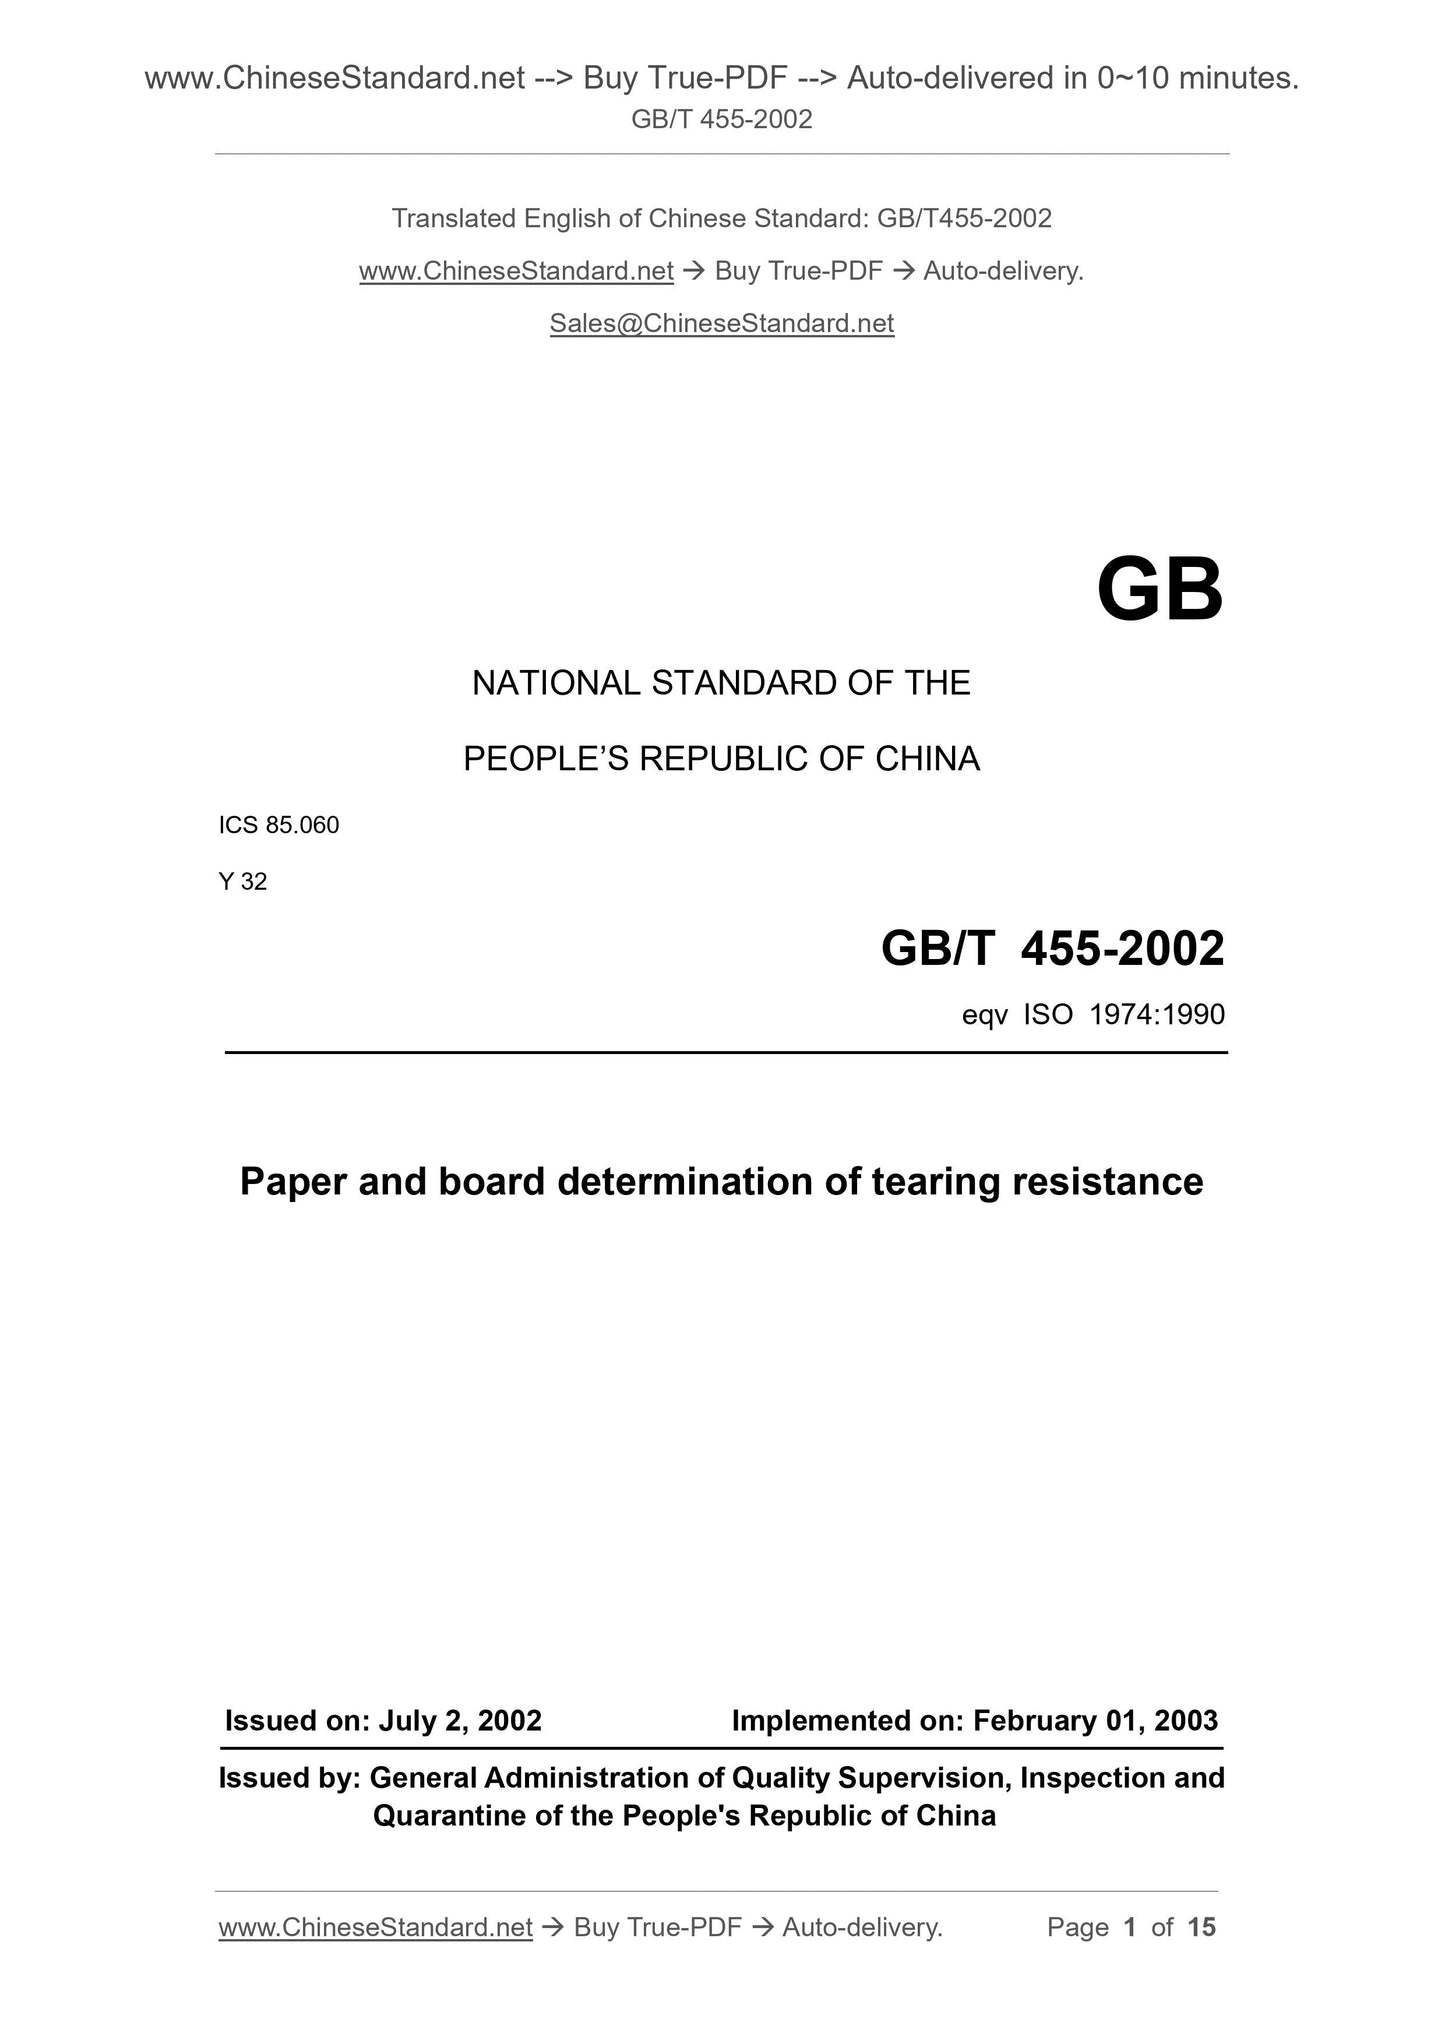 GB/T 455-2002 Page 1